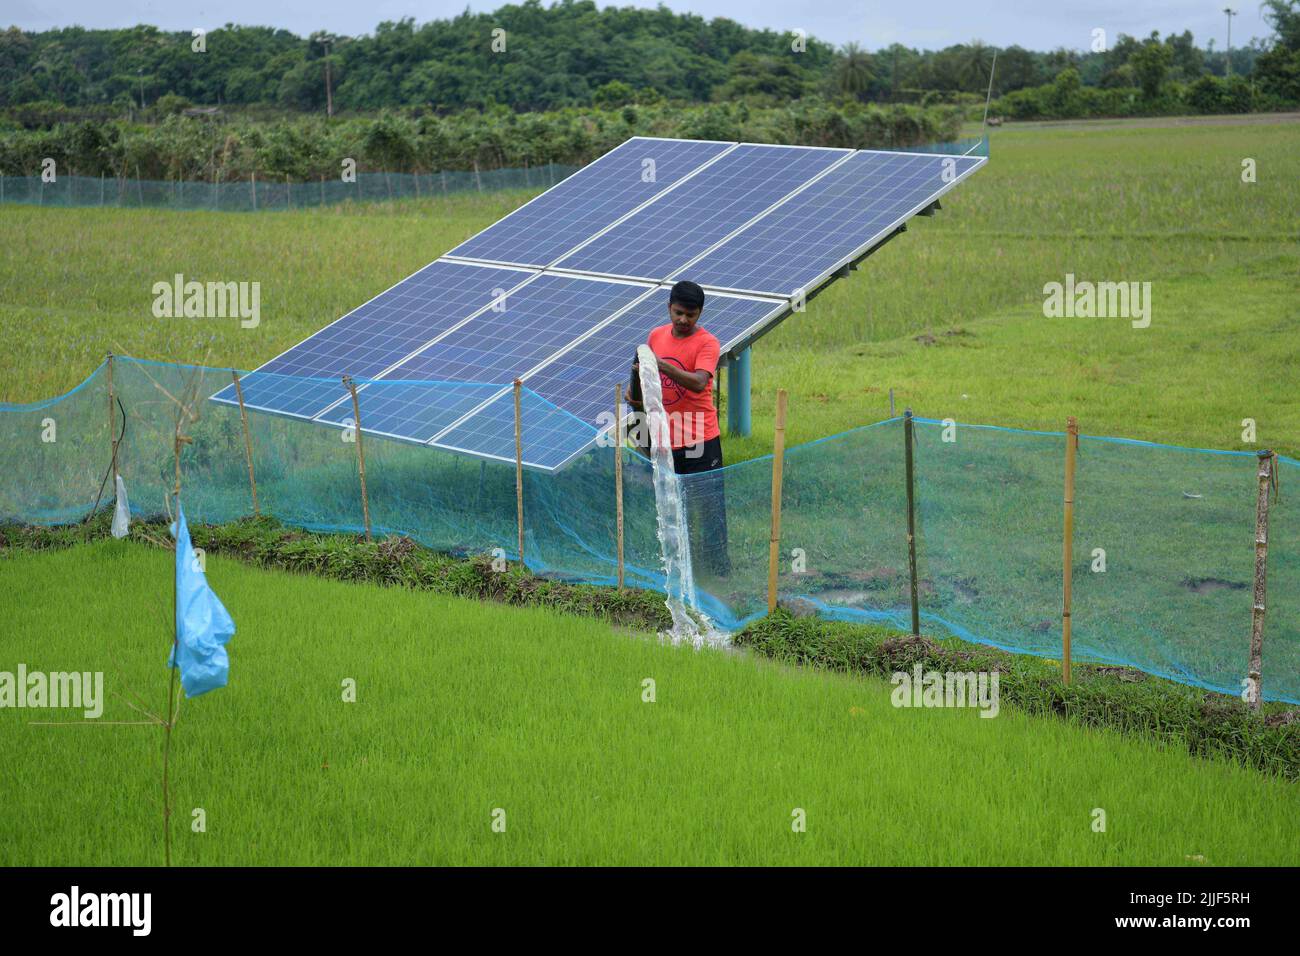 Ripan Deb, a 37 year old farmer putting water to his field through a solar-powered water pump which was installed in his field with the help of the Government of Tripura’s subsidised policy in Gokulnagar, Agartala. Tripura, India. Stock Photo